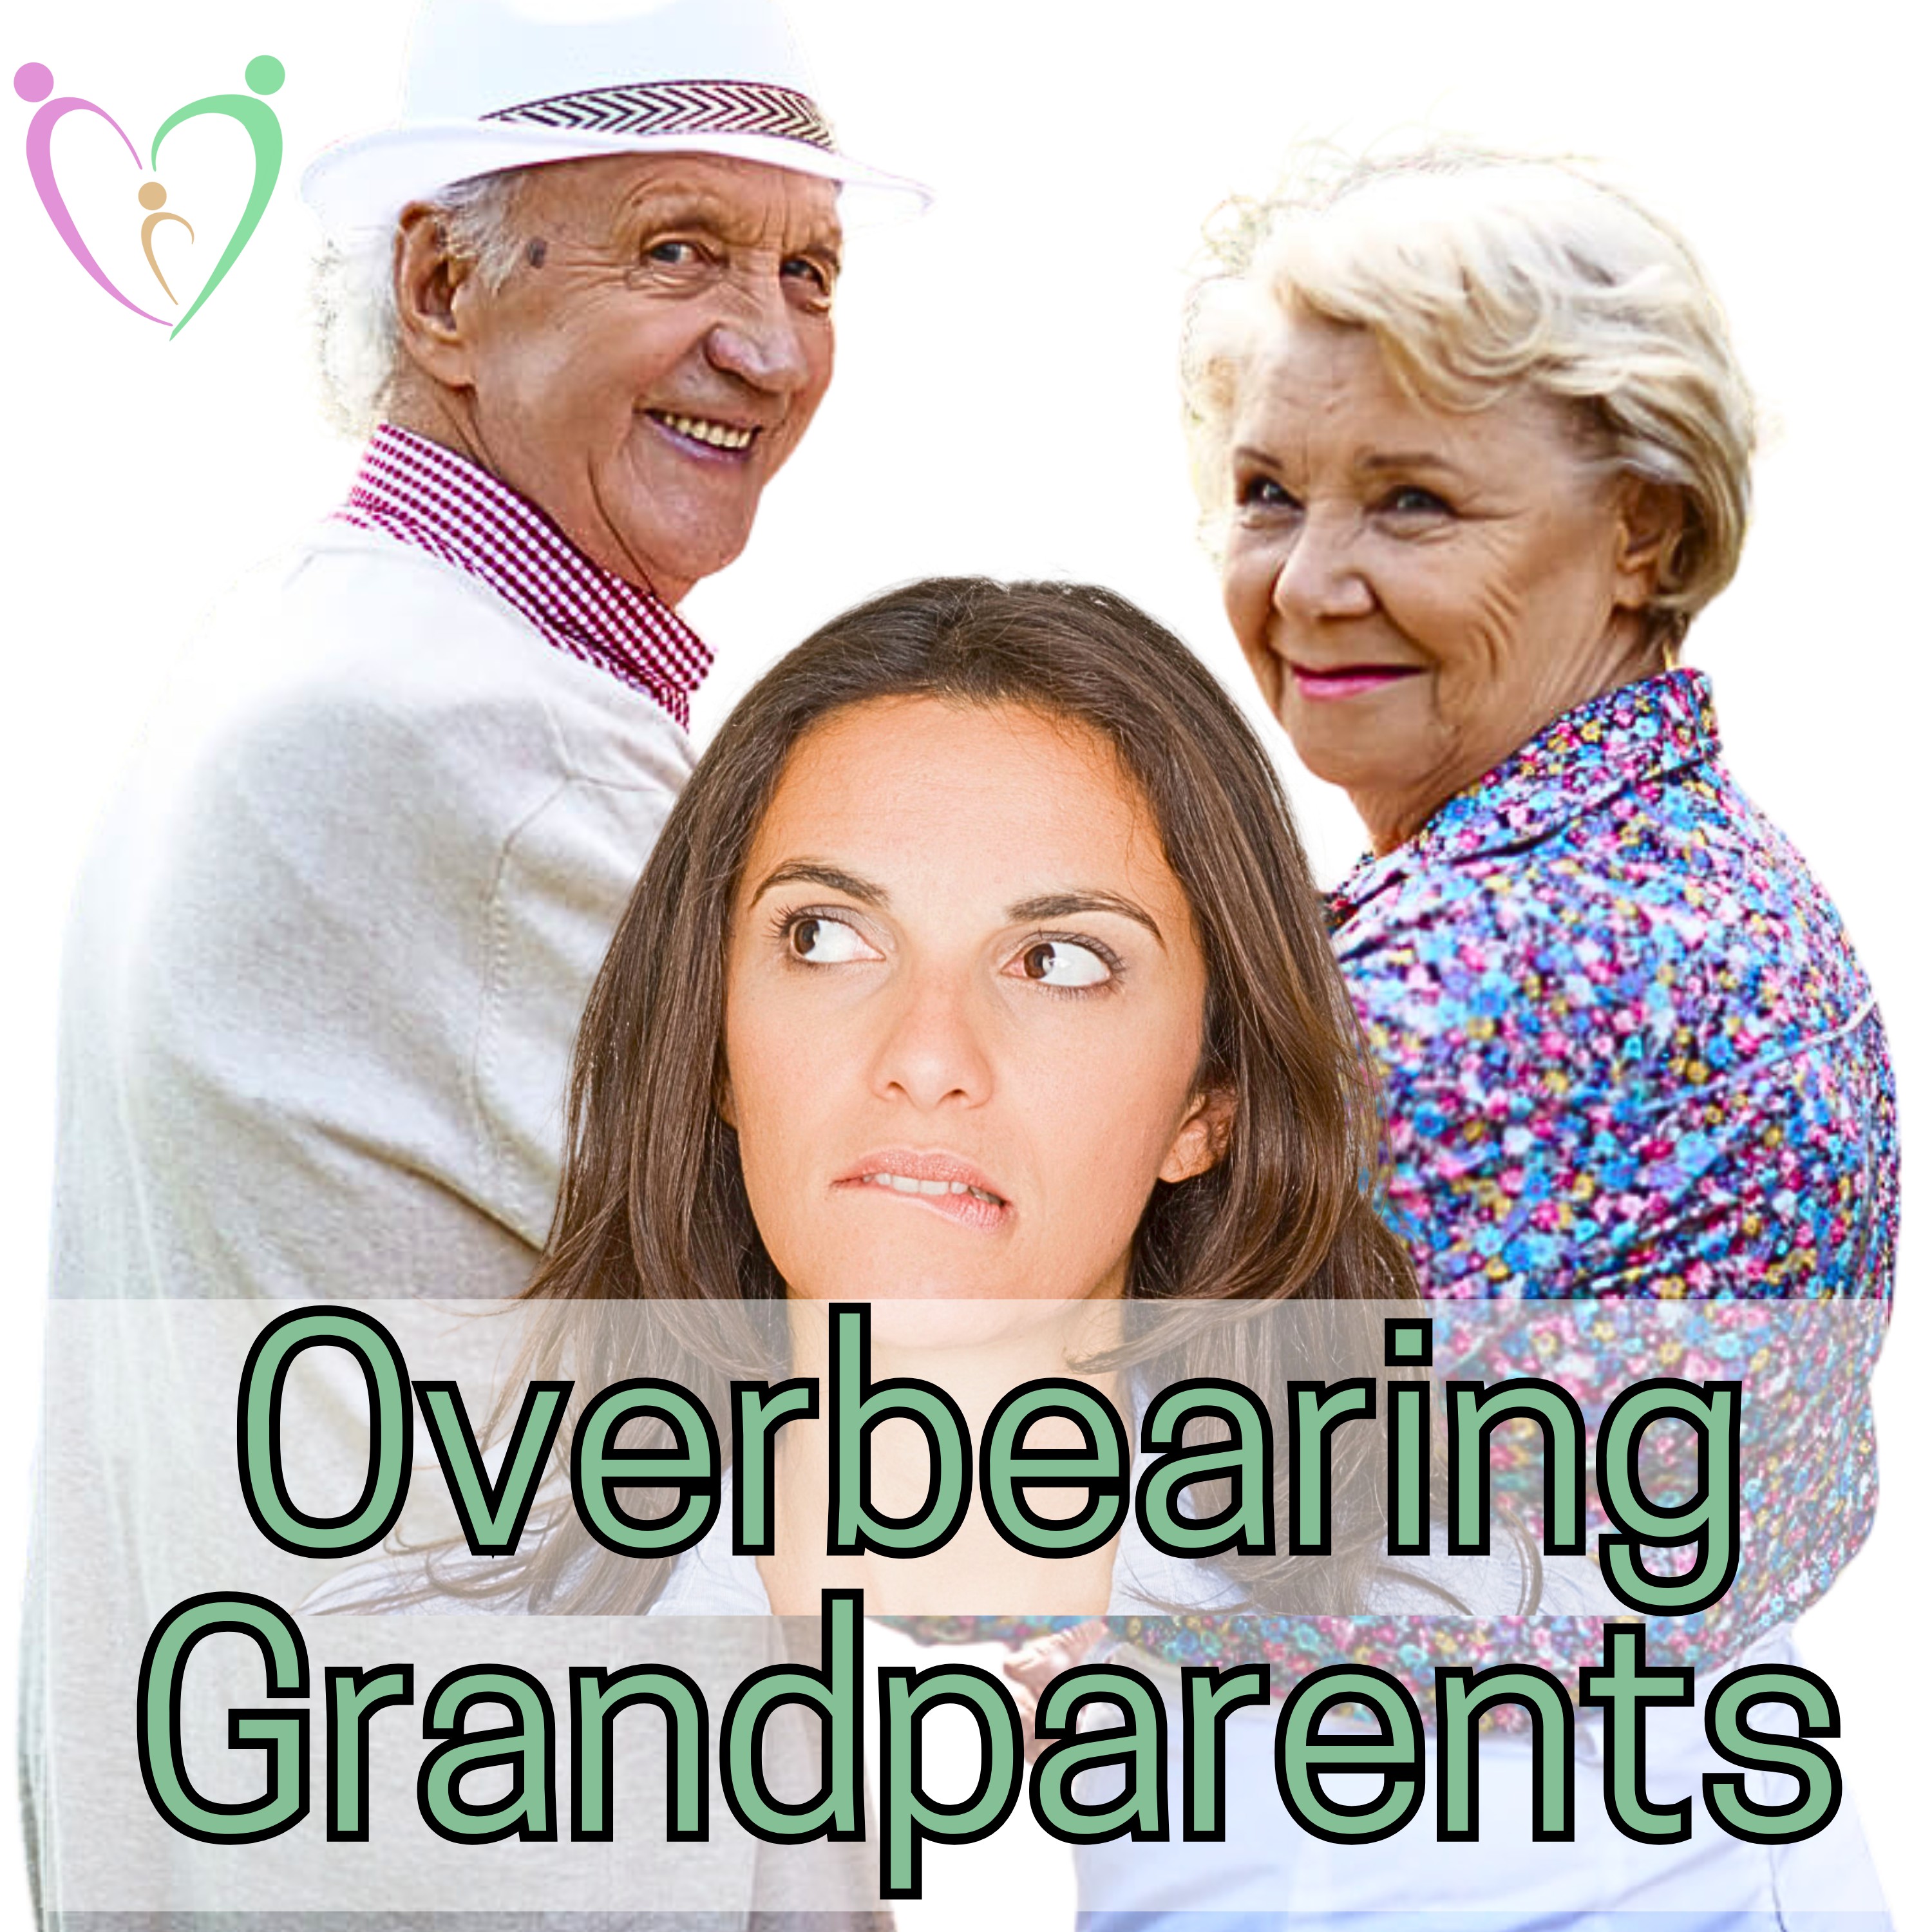 How to Deal with Overbearing Grandparents